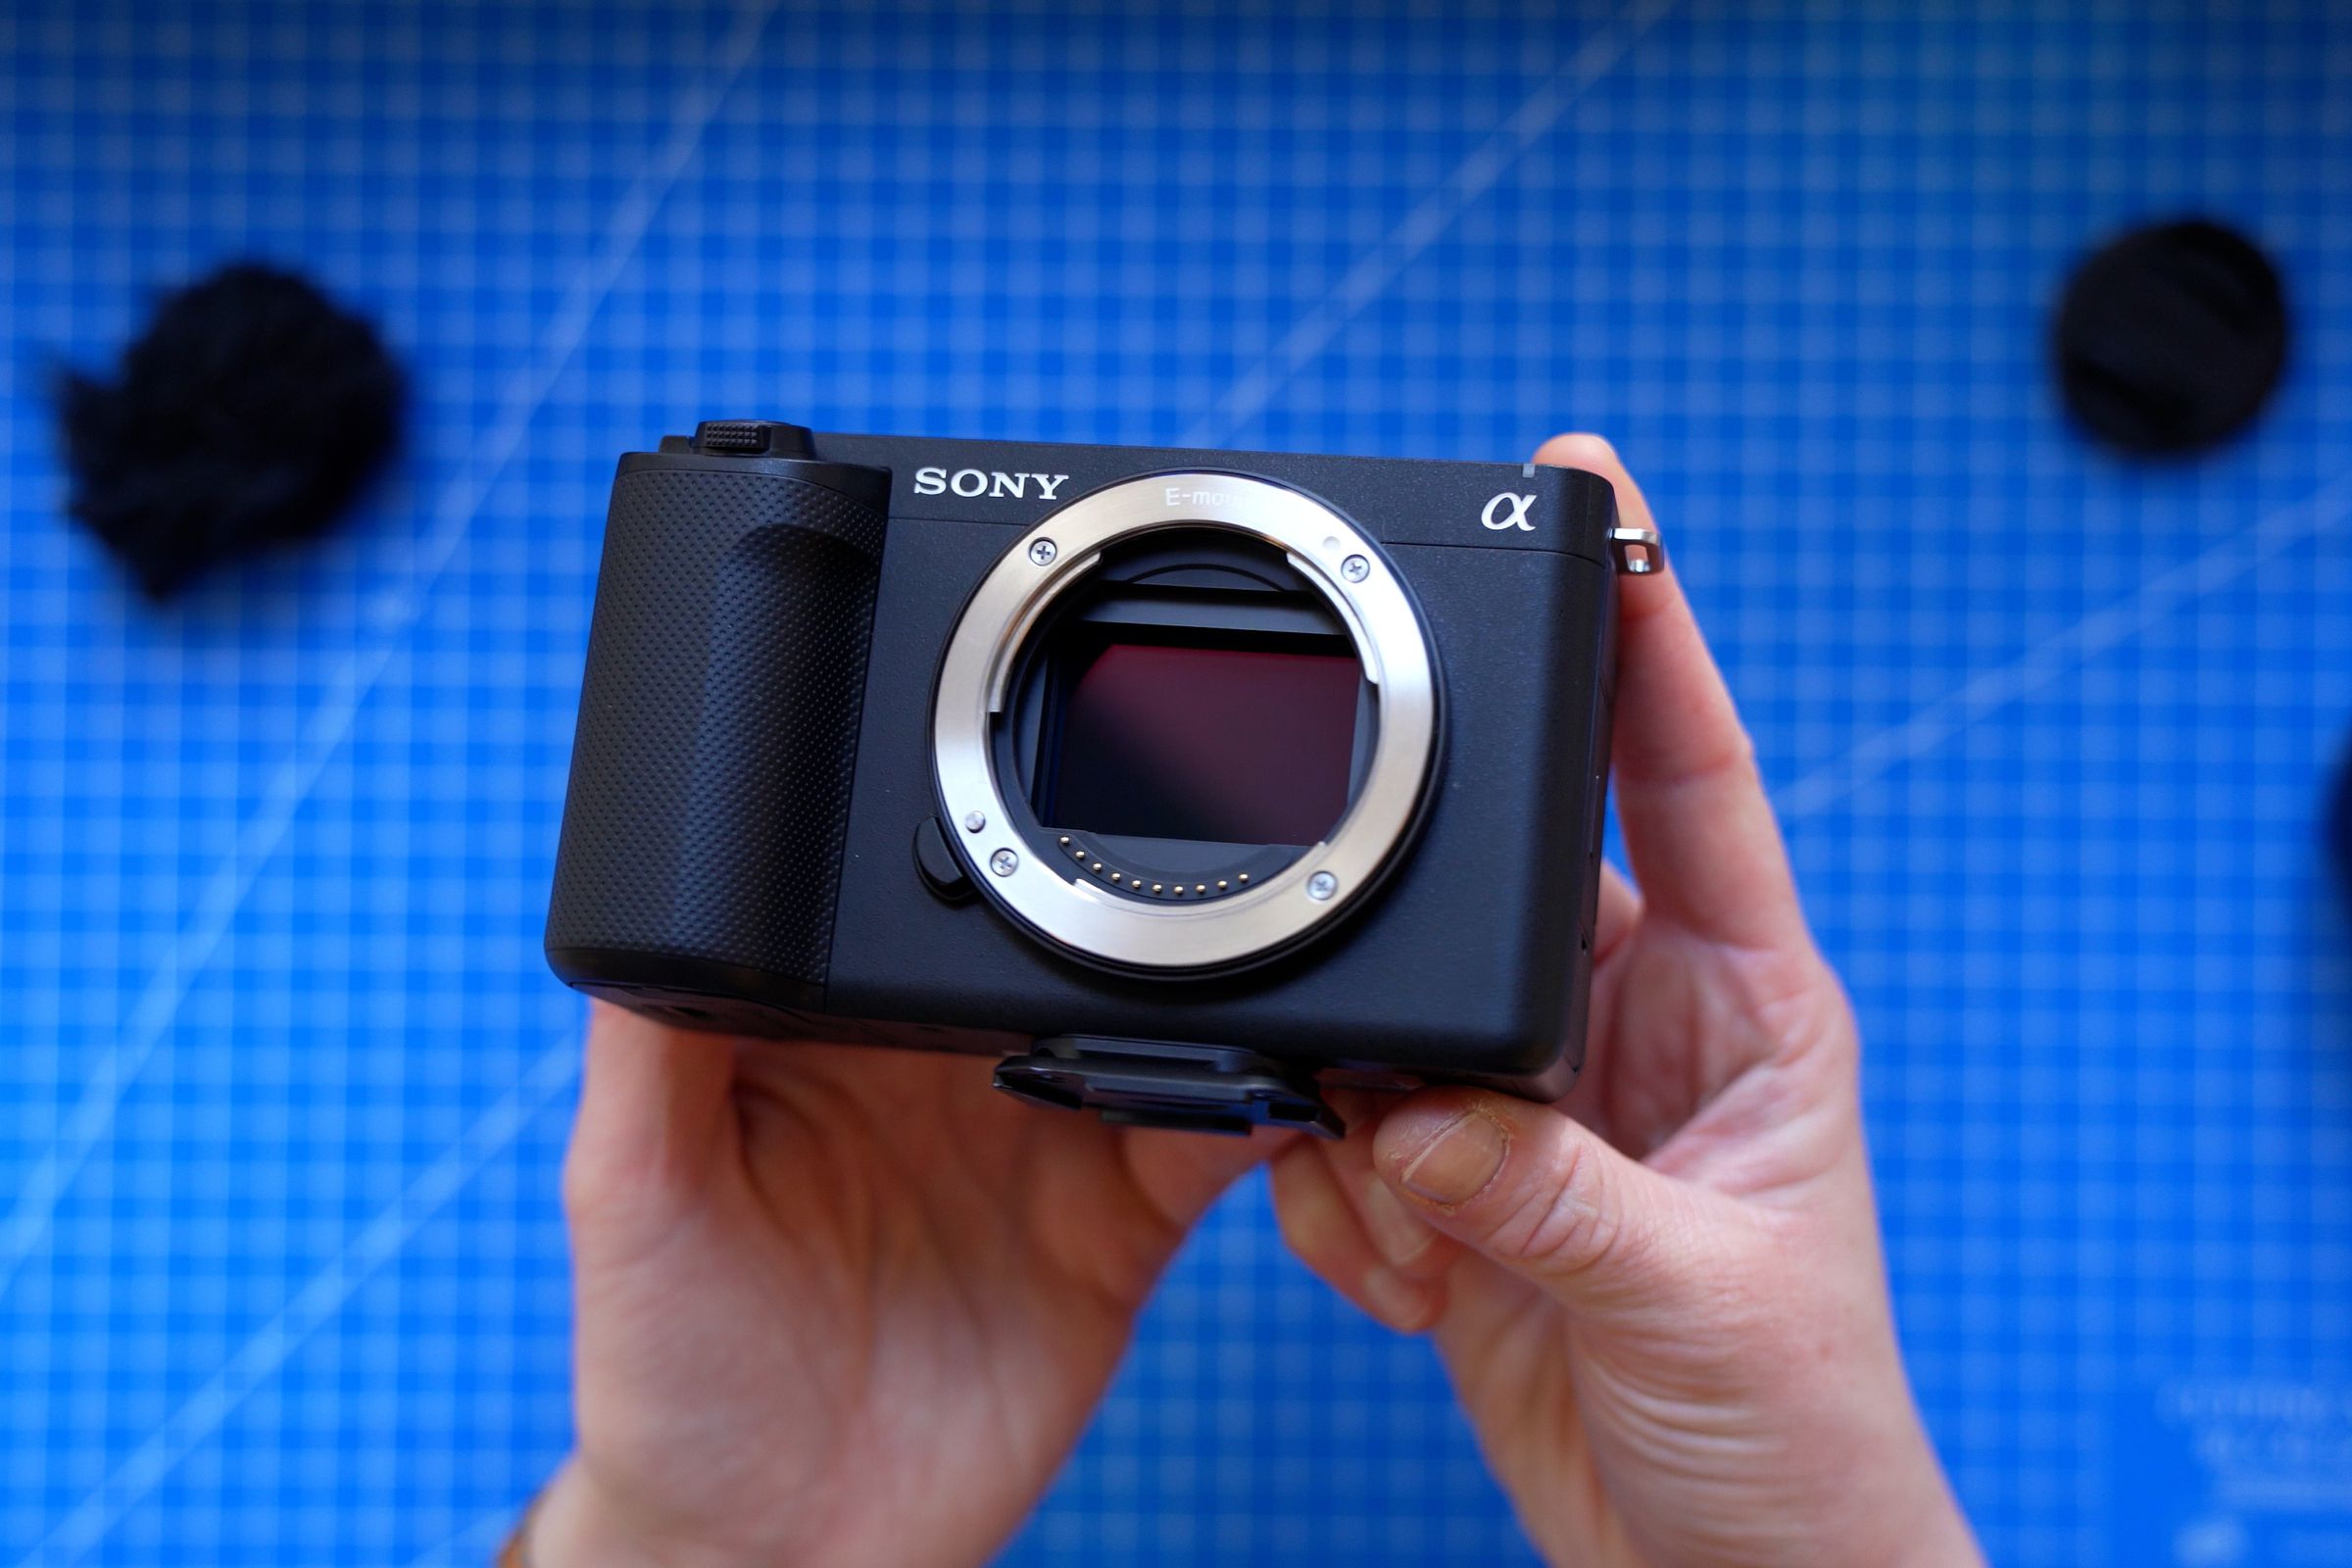 The Sony ZV-E1 camera without a lens attached, held up in a person’s hands above a blue cutting mat.